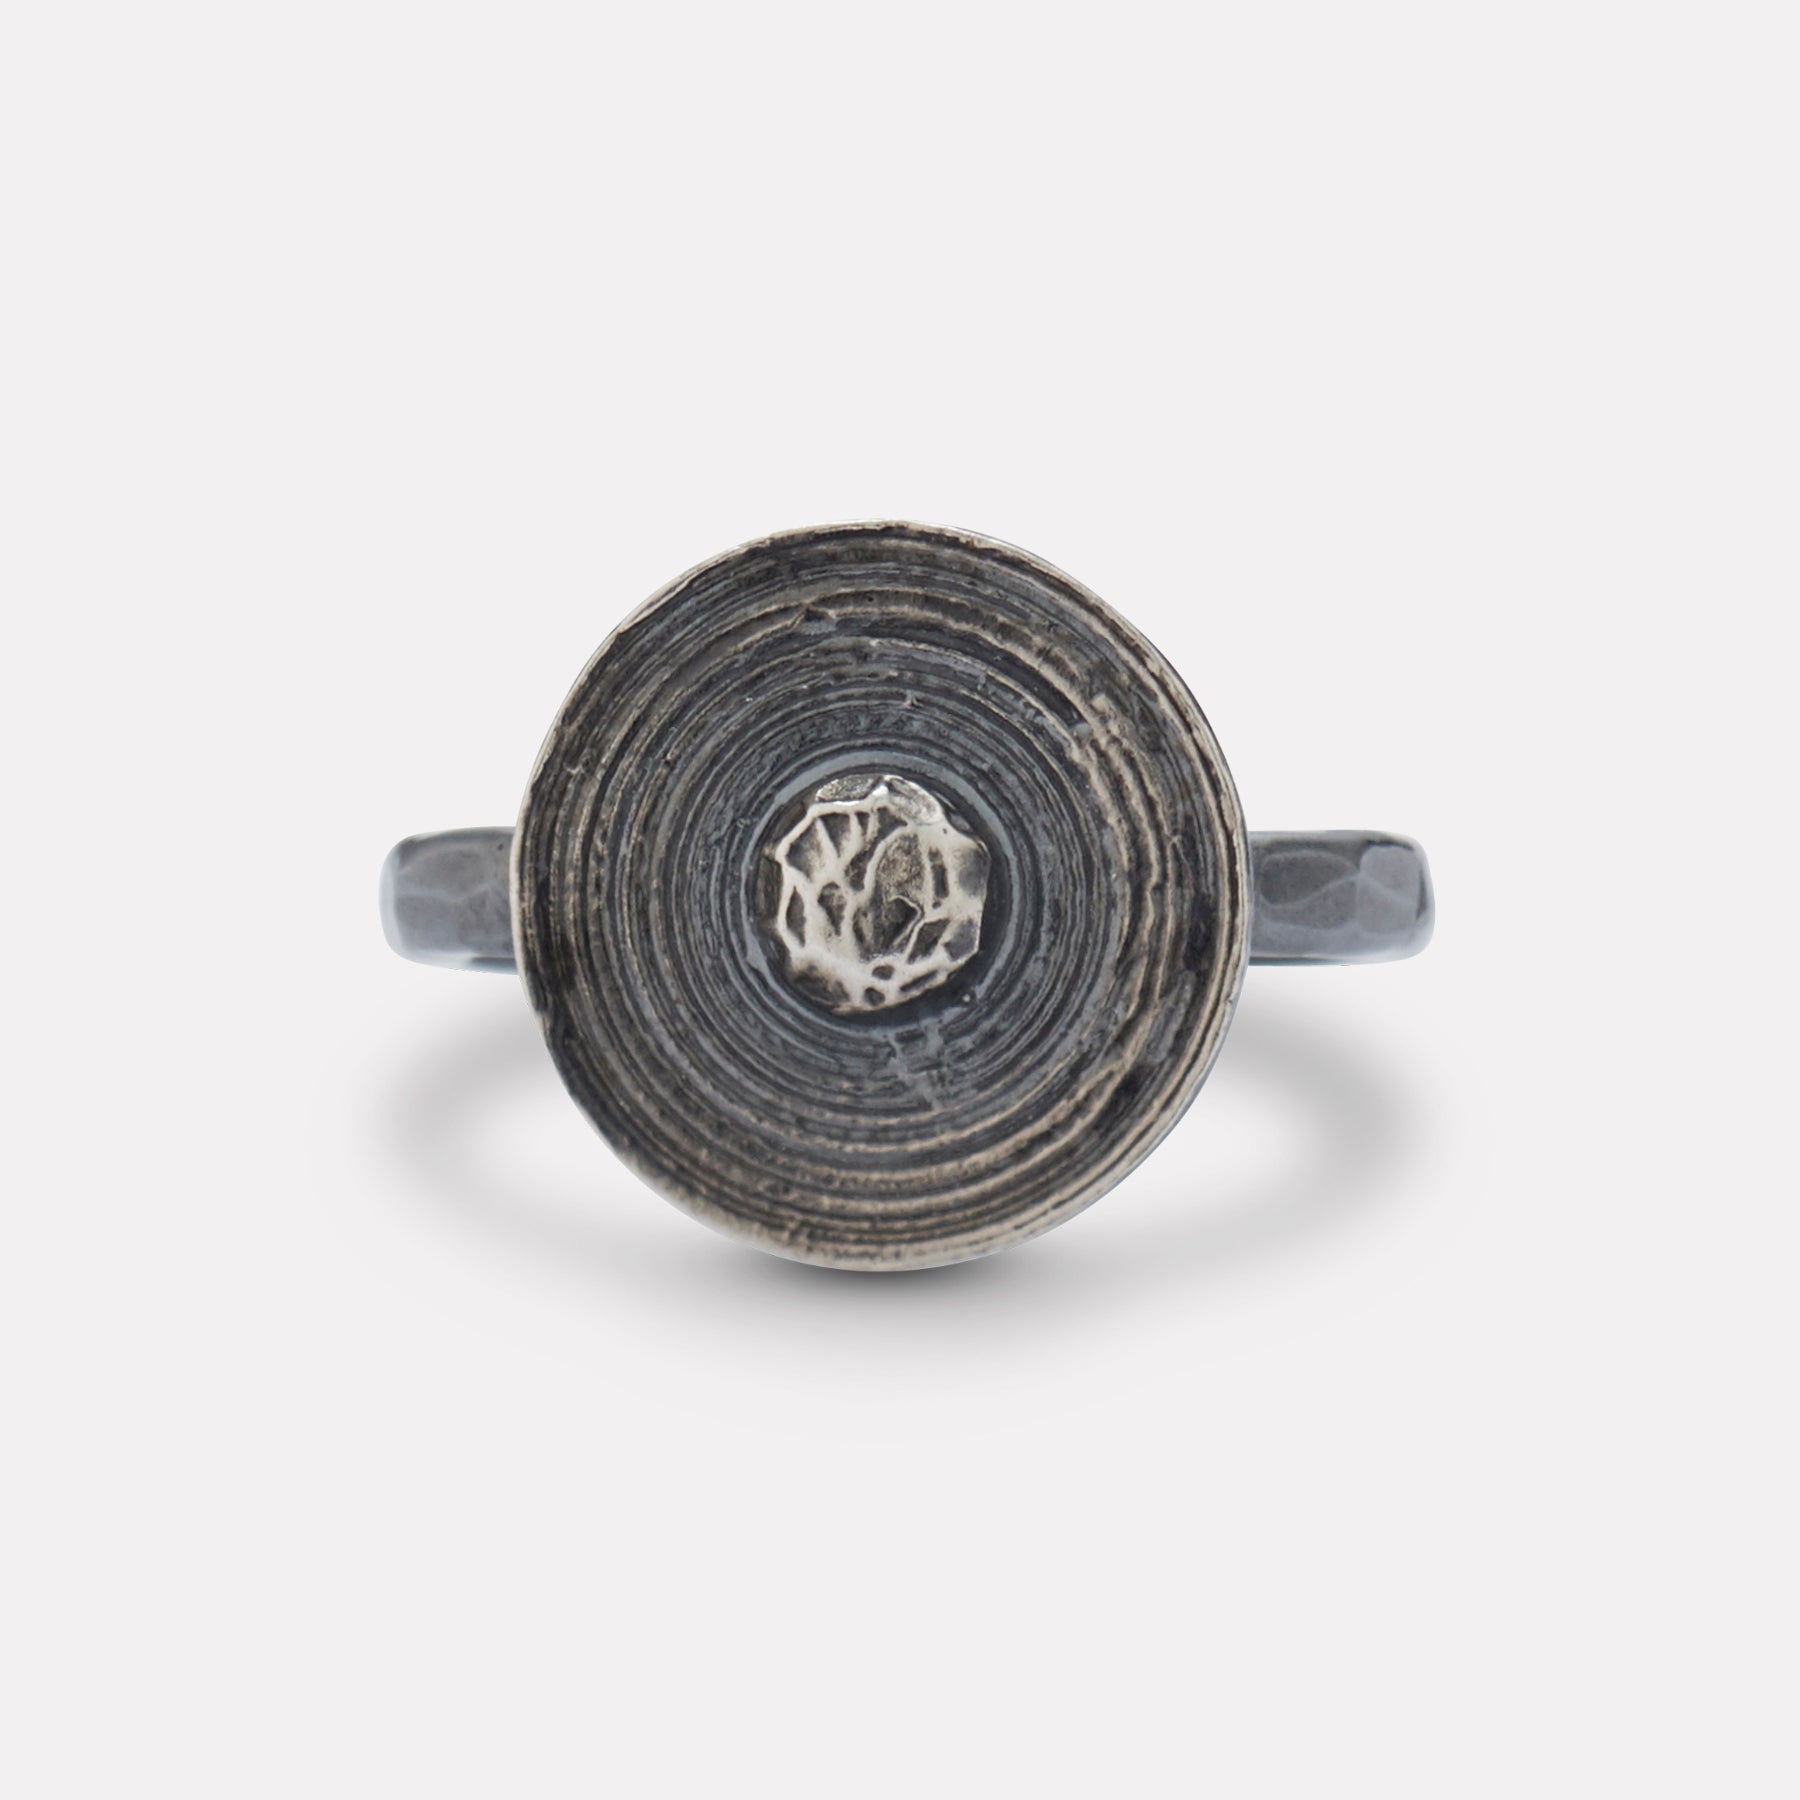 Viking shield ring in oxidized silver